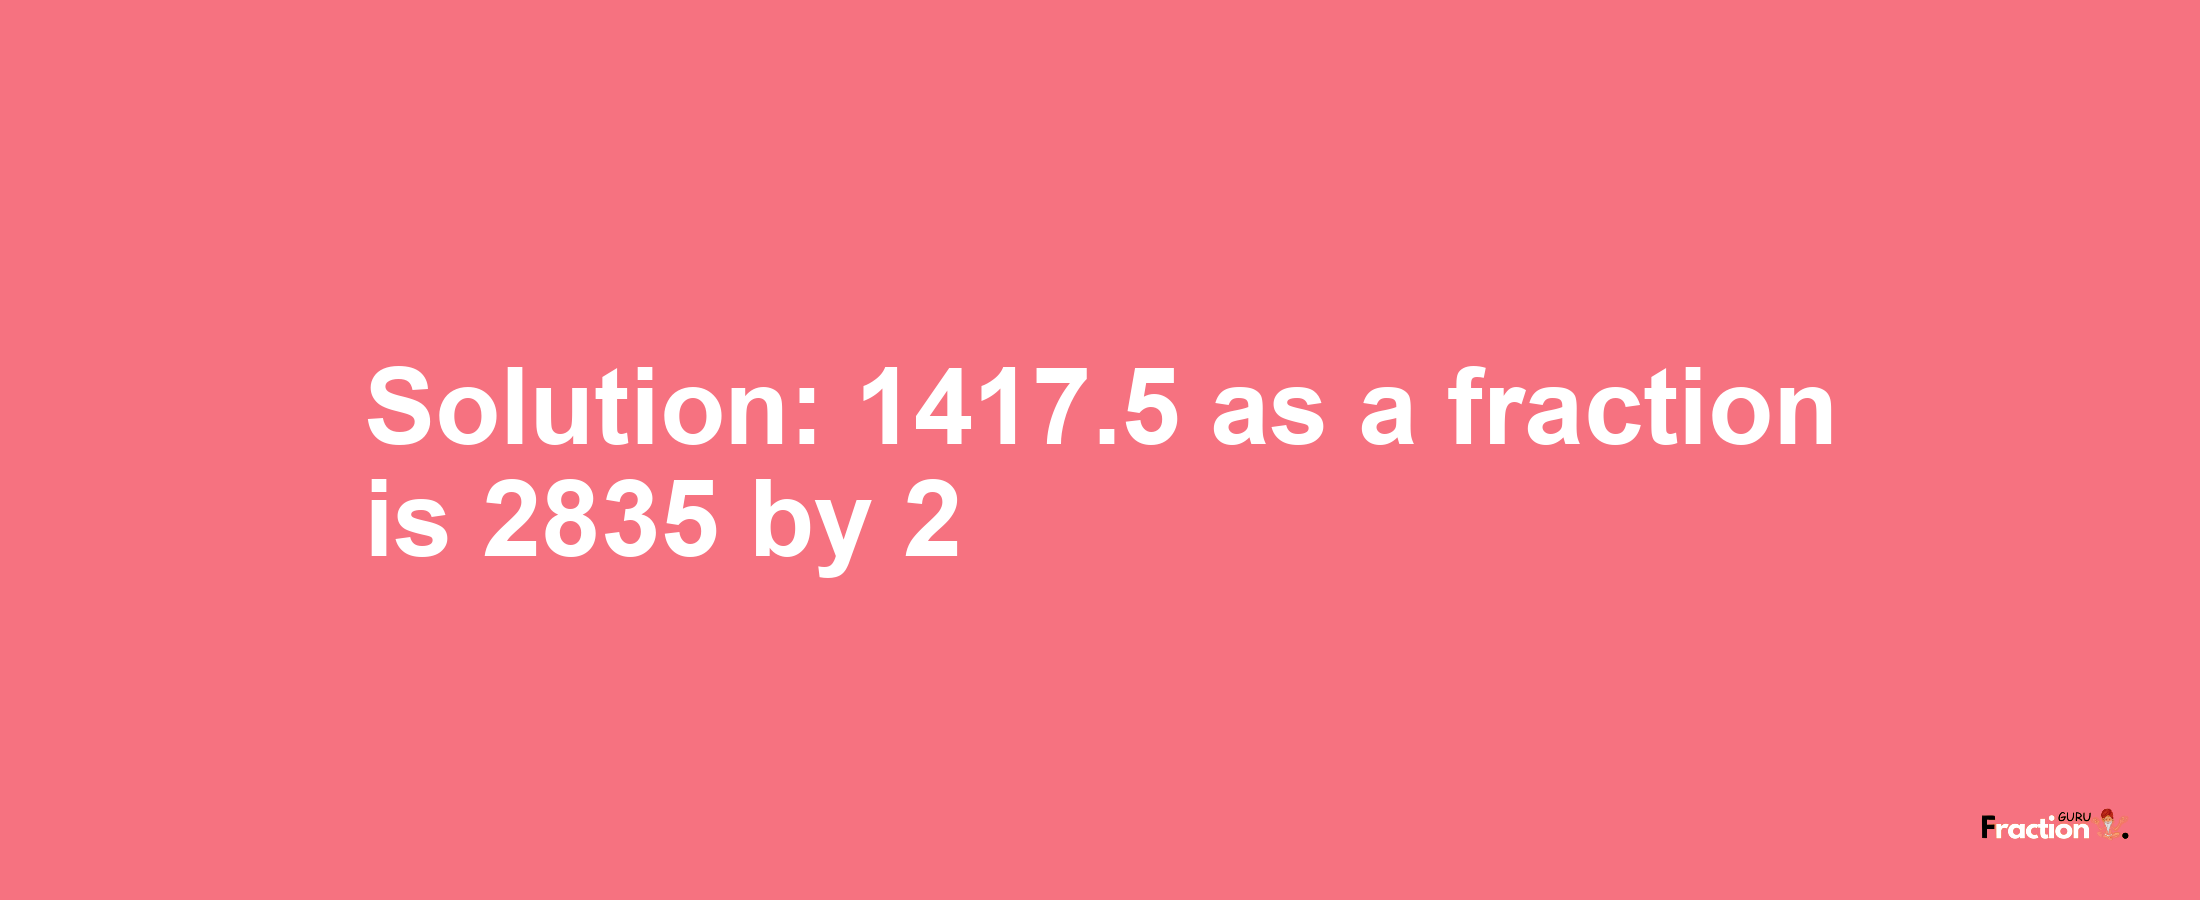 Solution:1417.5 as a fraction is 2835/2